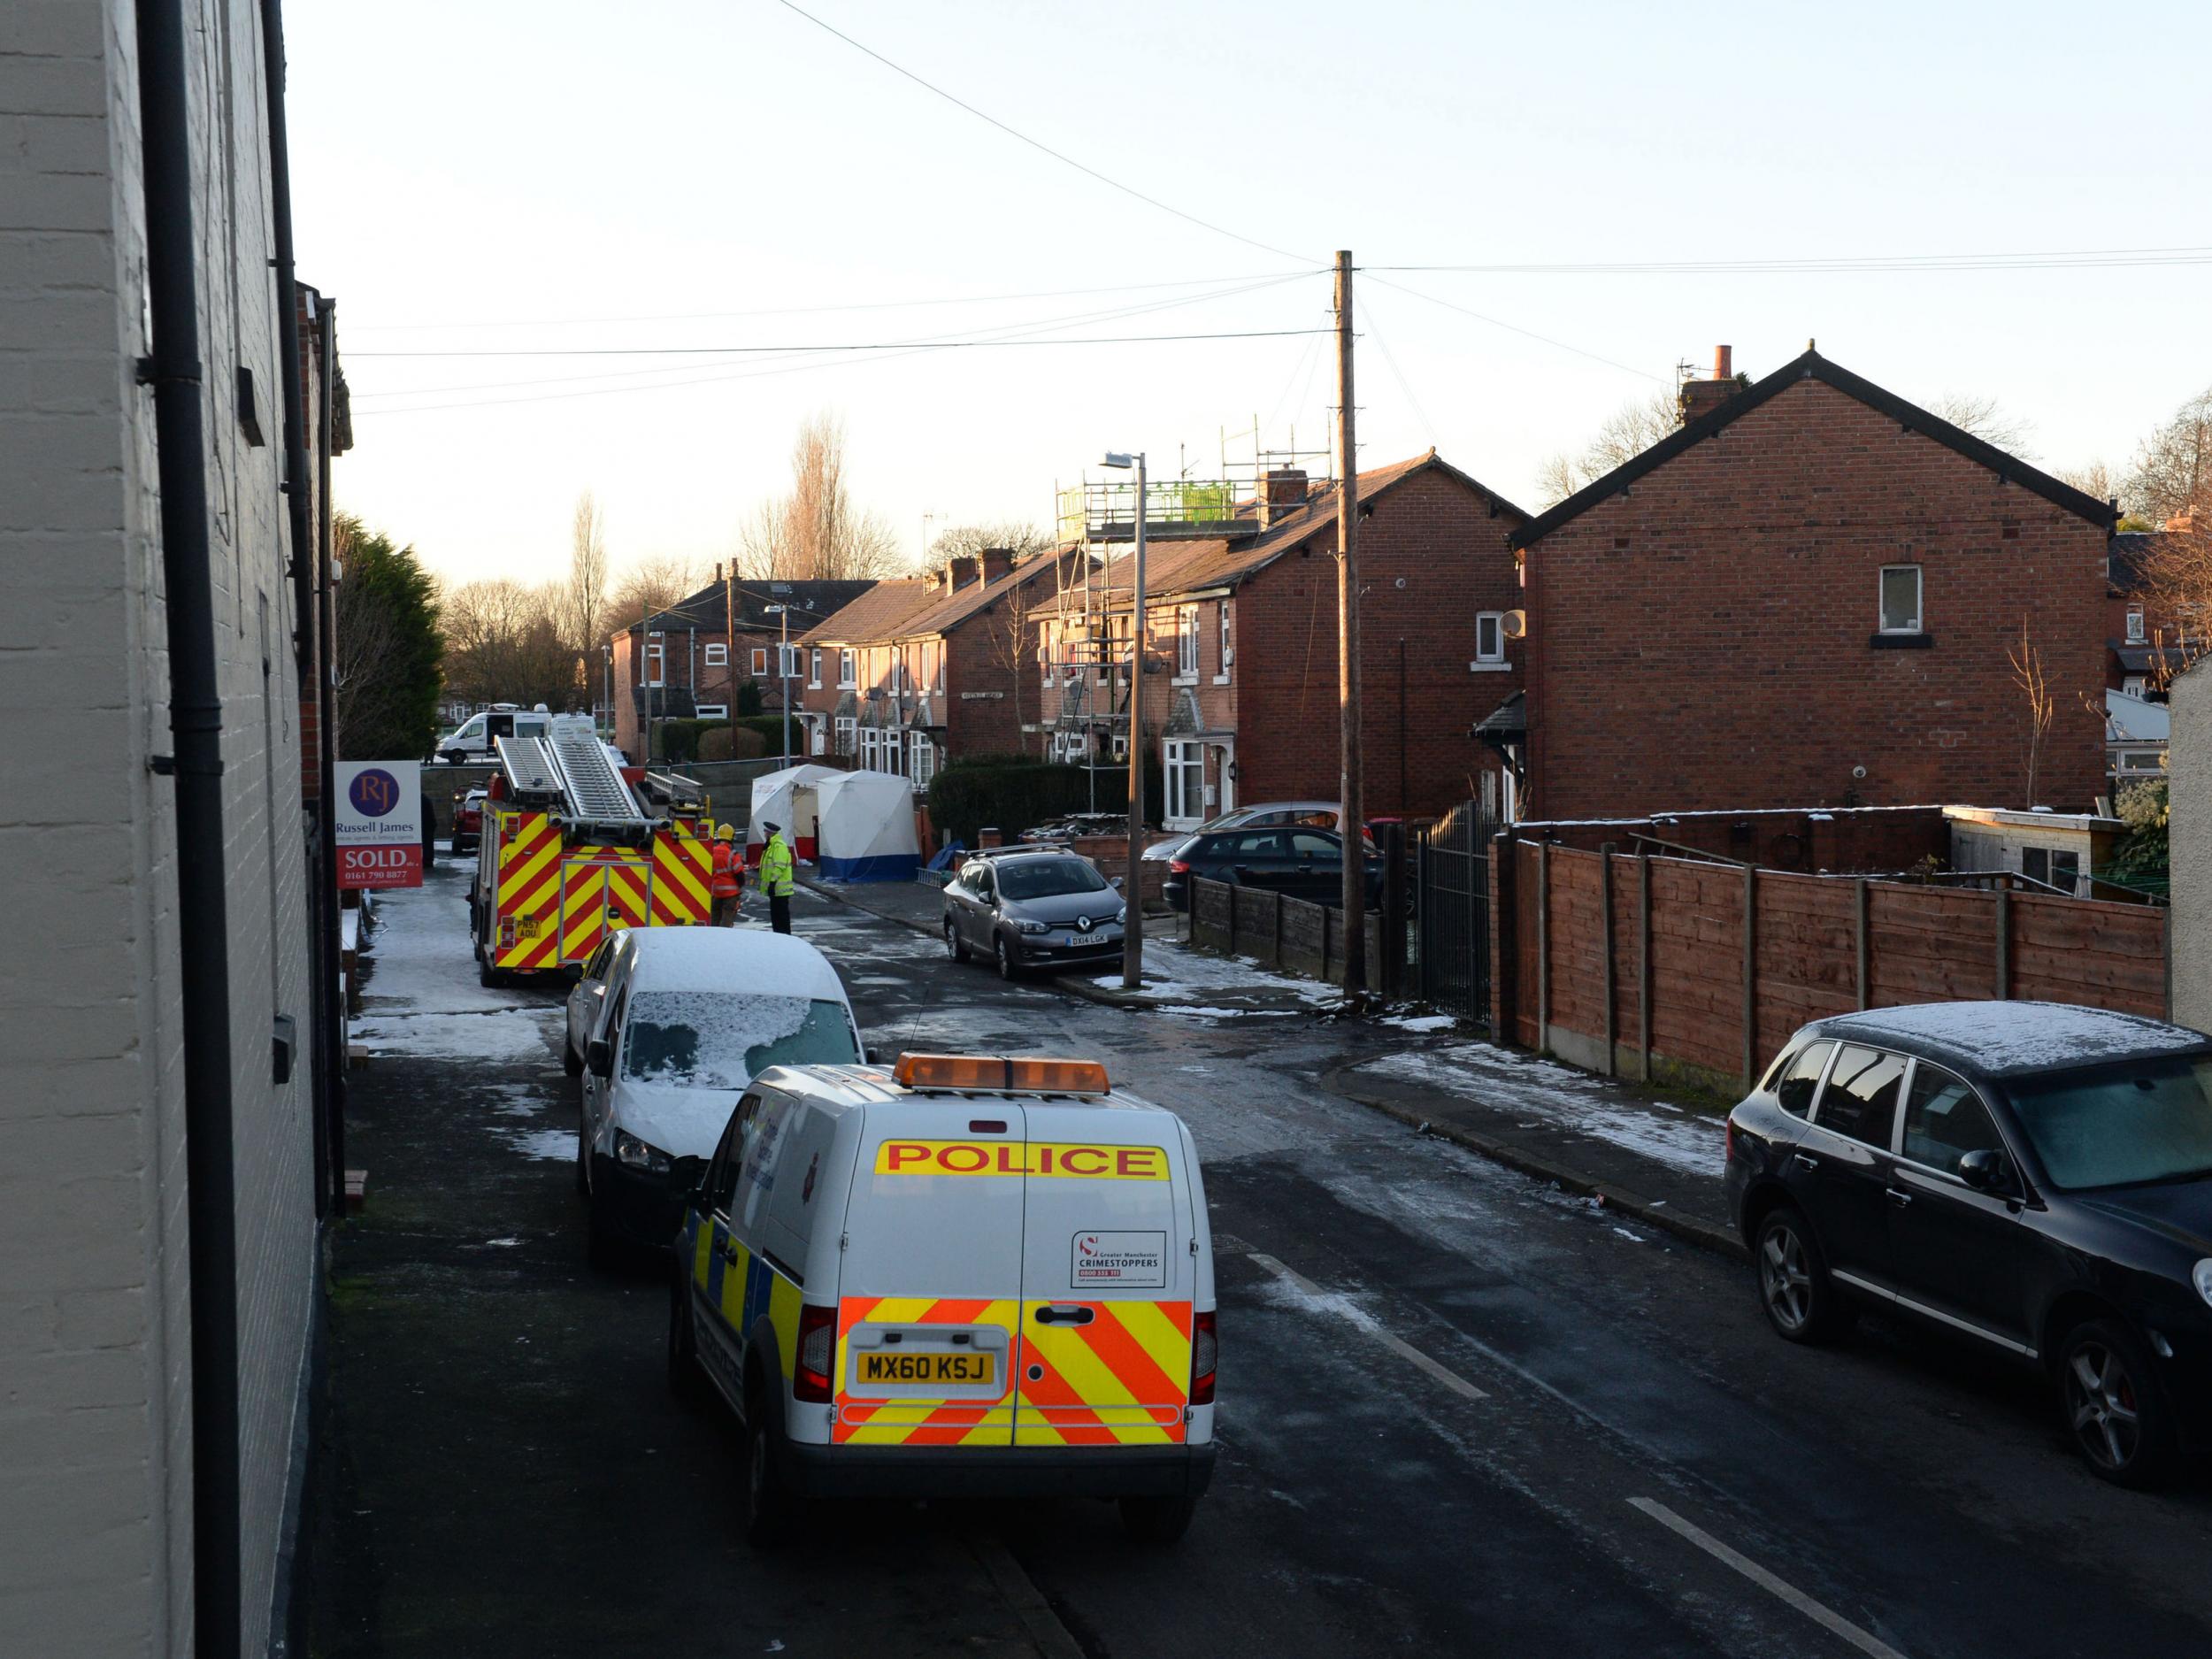 Emergency services at the scene of a house fire on Jackson Street in Worsley, Greater Manchester, as a murder inquiry has been launched after three children died following the fire